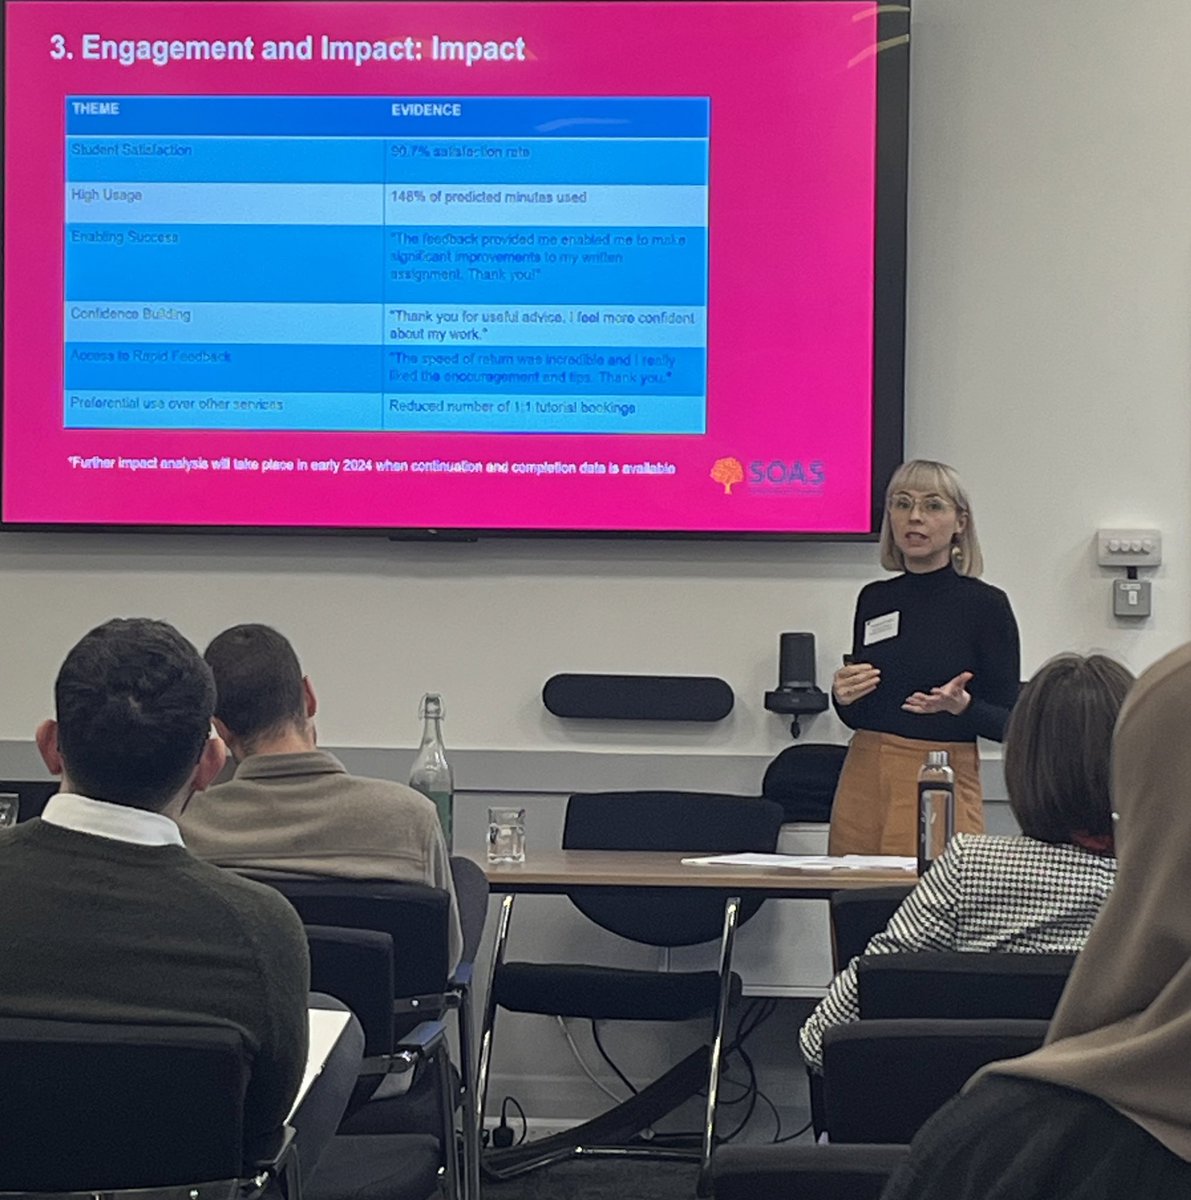 Thank you to @s_e_omalley for your insightful @SOAS case study and to the very engaged audience during this year’s #uukaccess. We ran out of time unfortunately but please do reach out with any unasked questions for Dr Sarah O’Malley or @DebbyHsieh1 @UUKevents